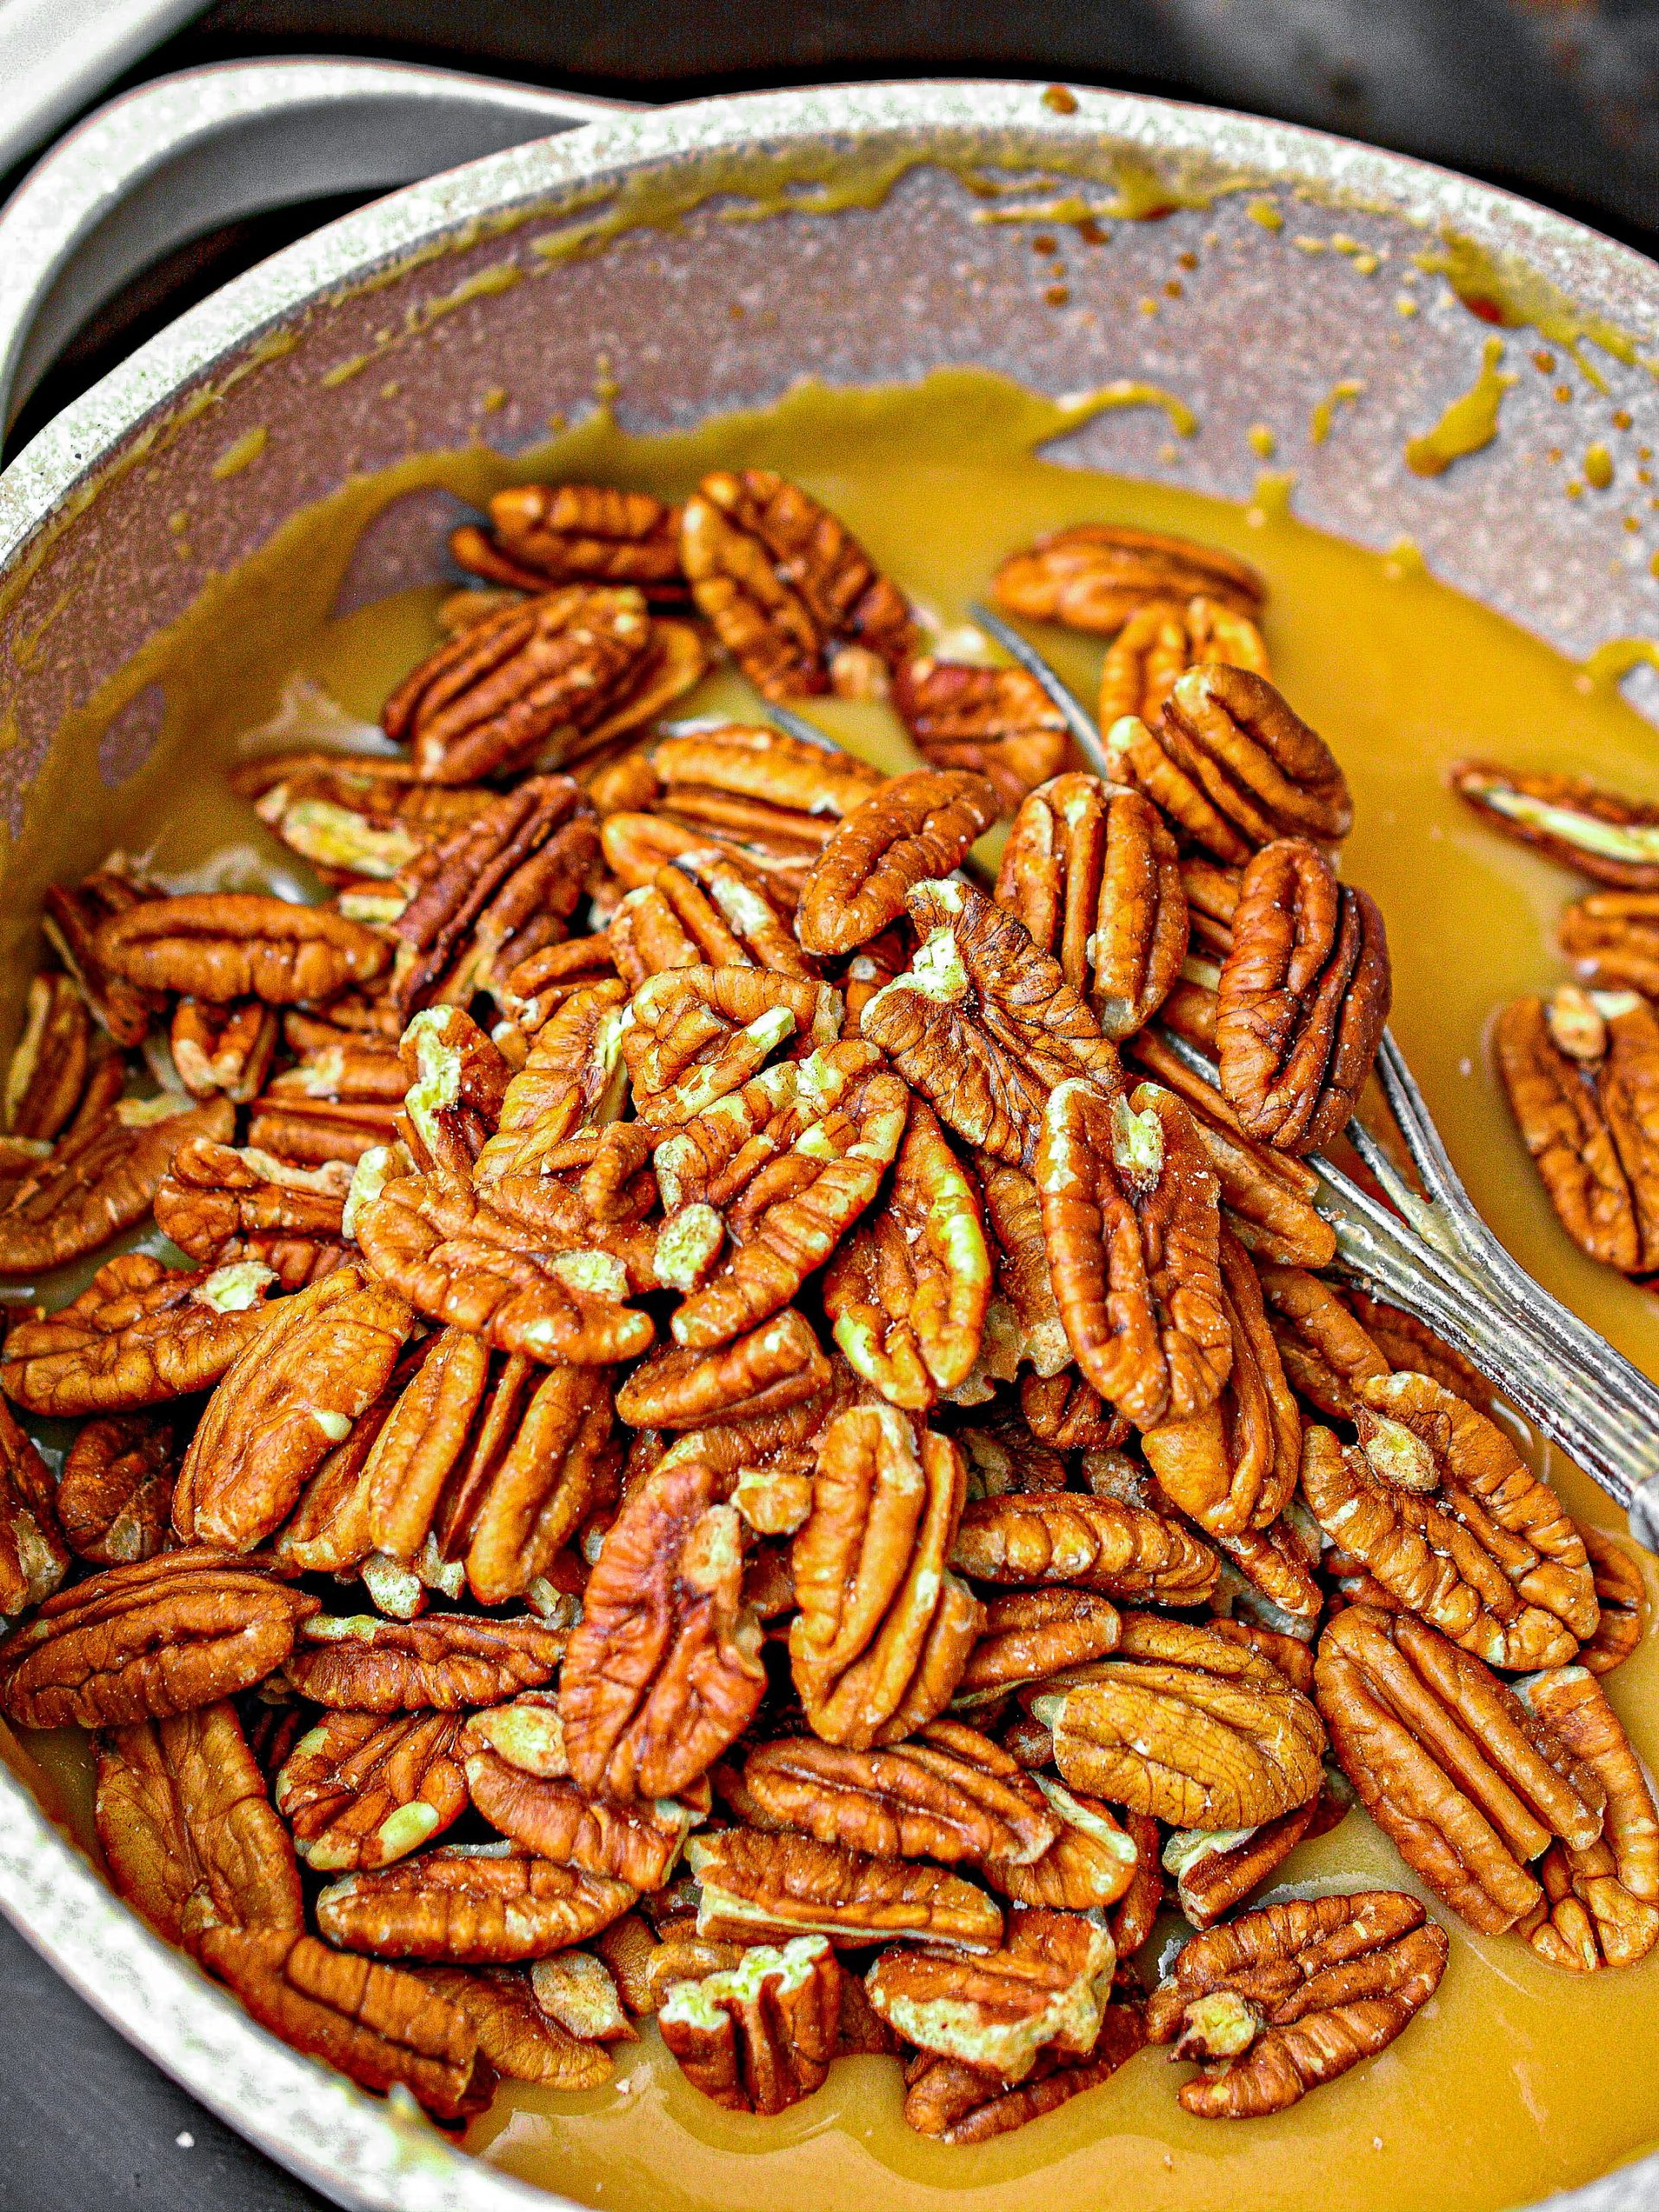 Add the pecans to the mixture, and stir to combine.